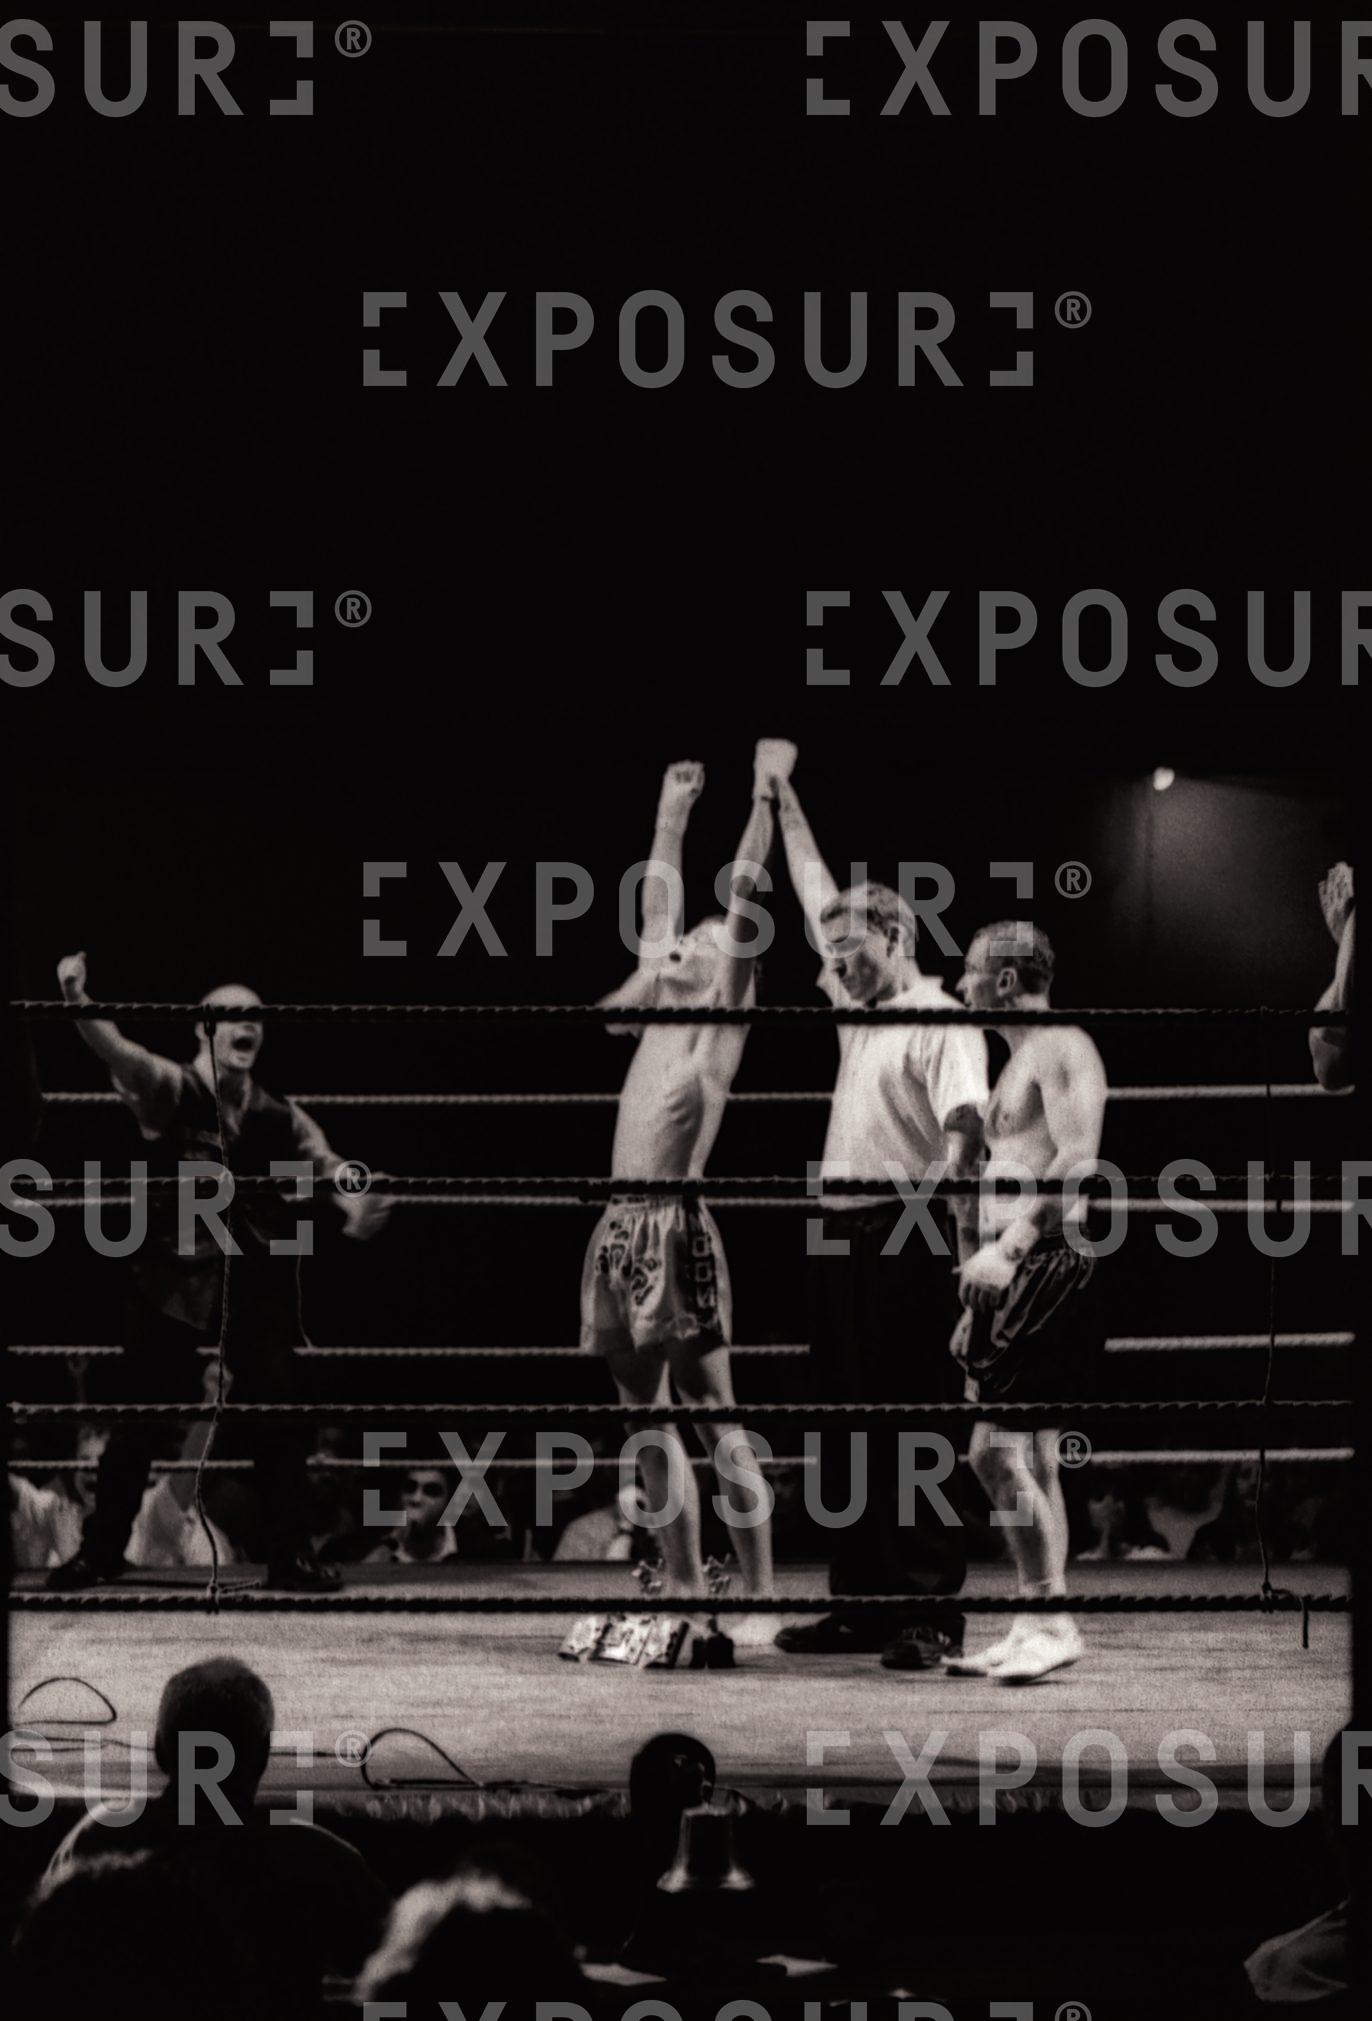 The winner of a Thai boxing match, south London, late 1990’s